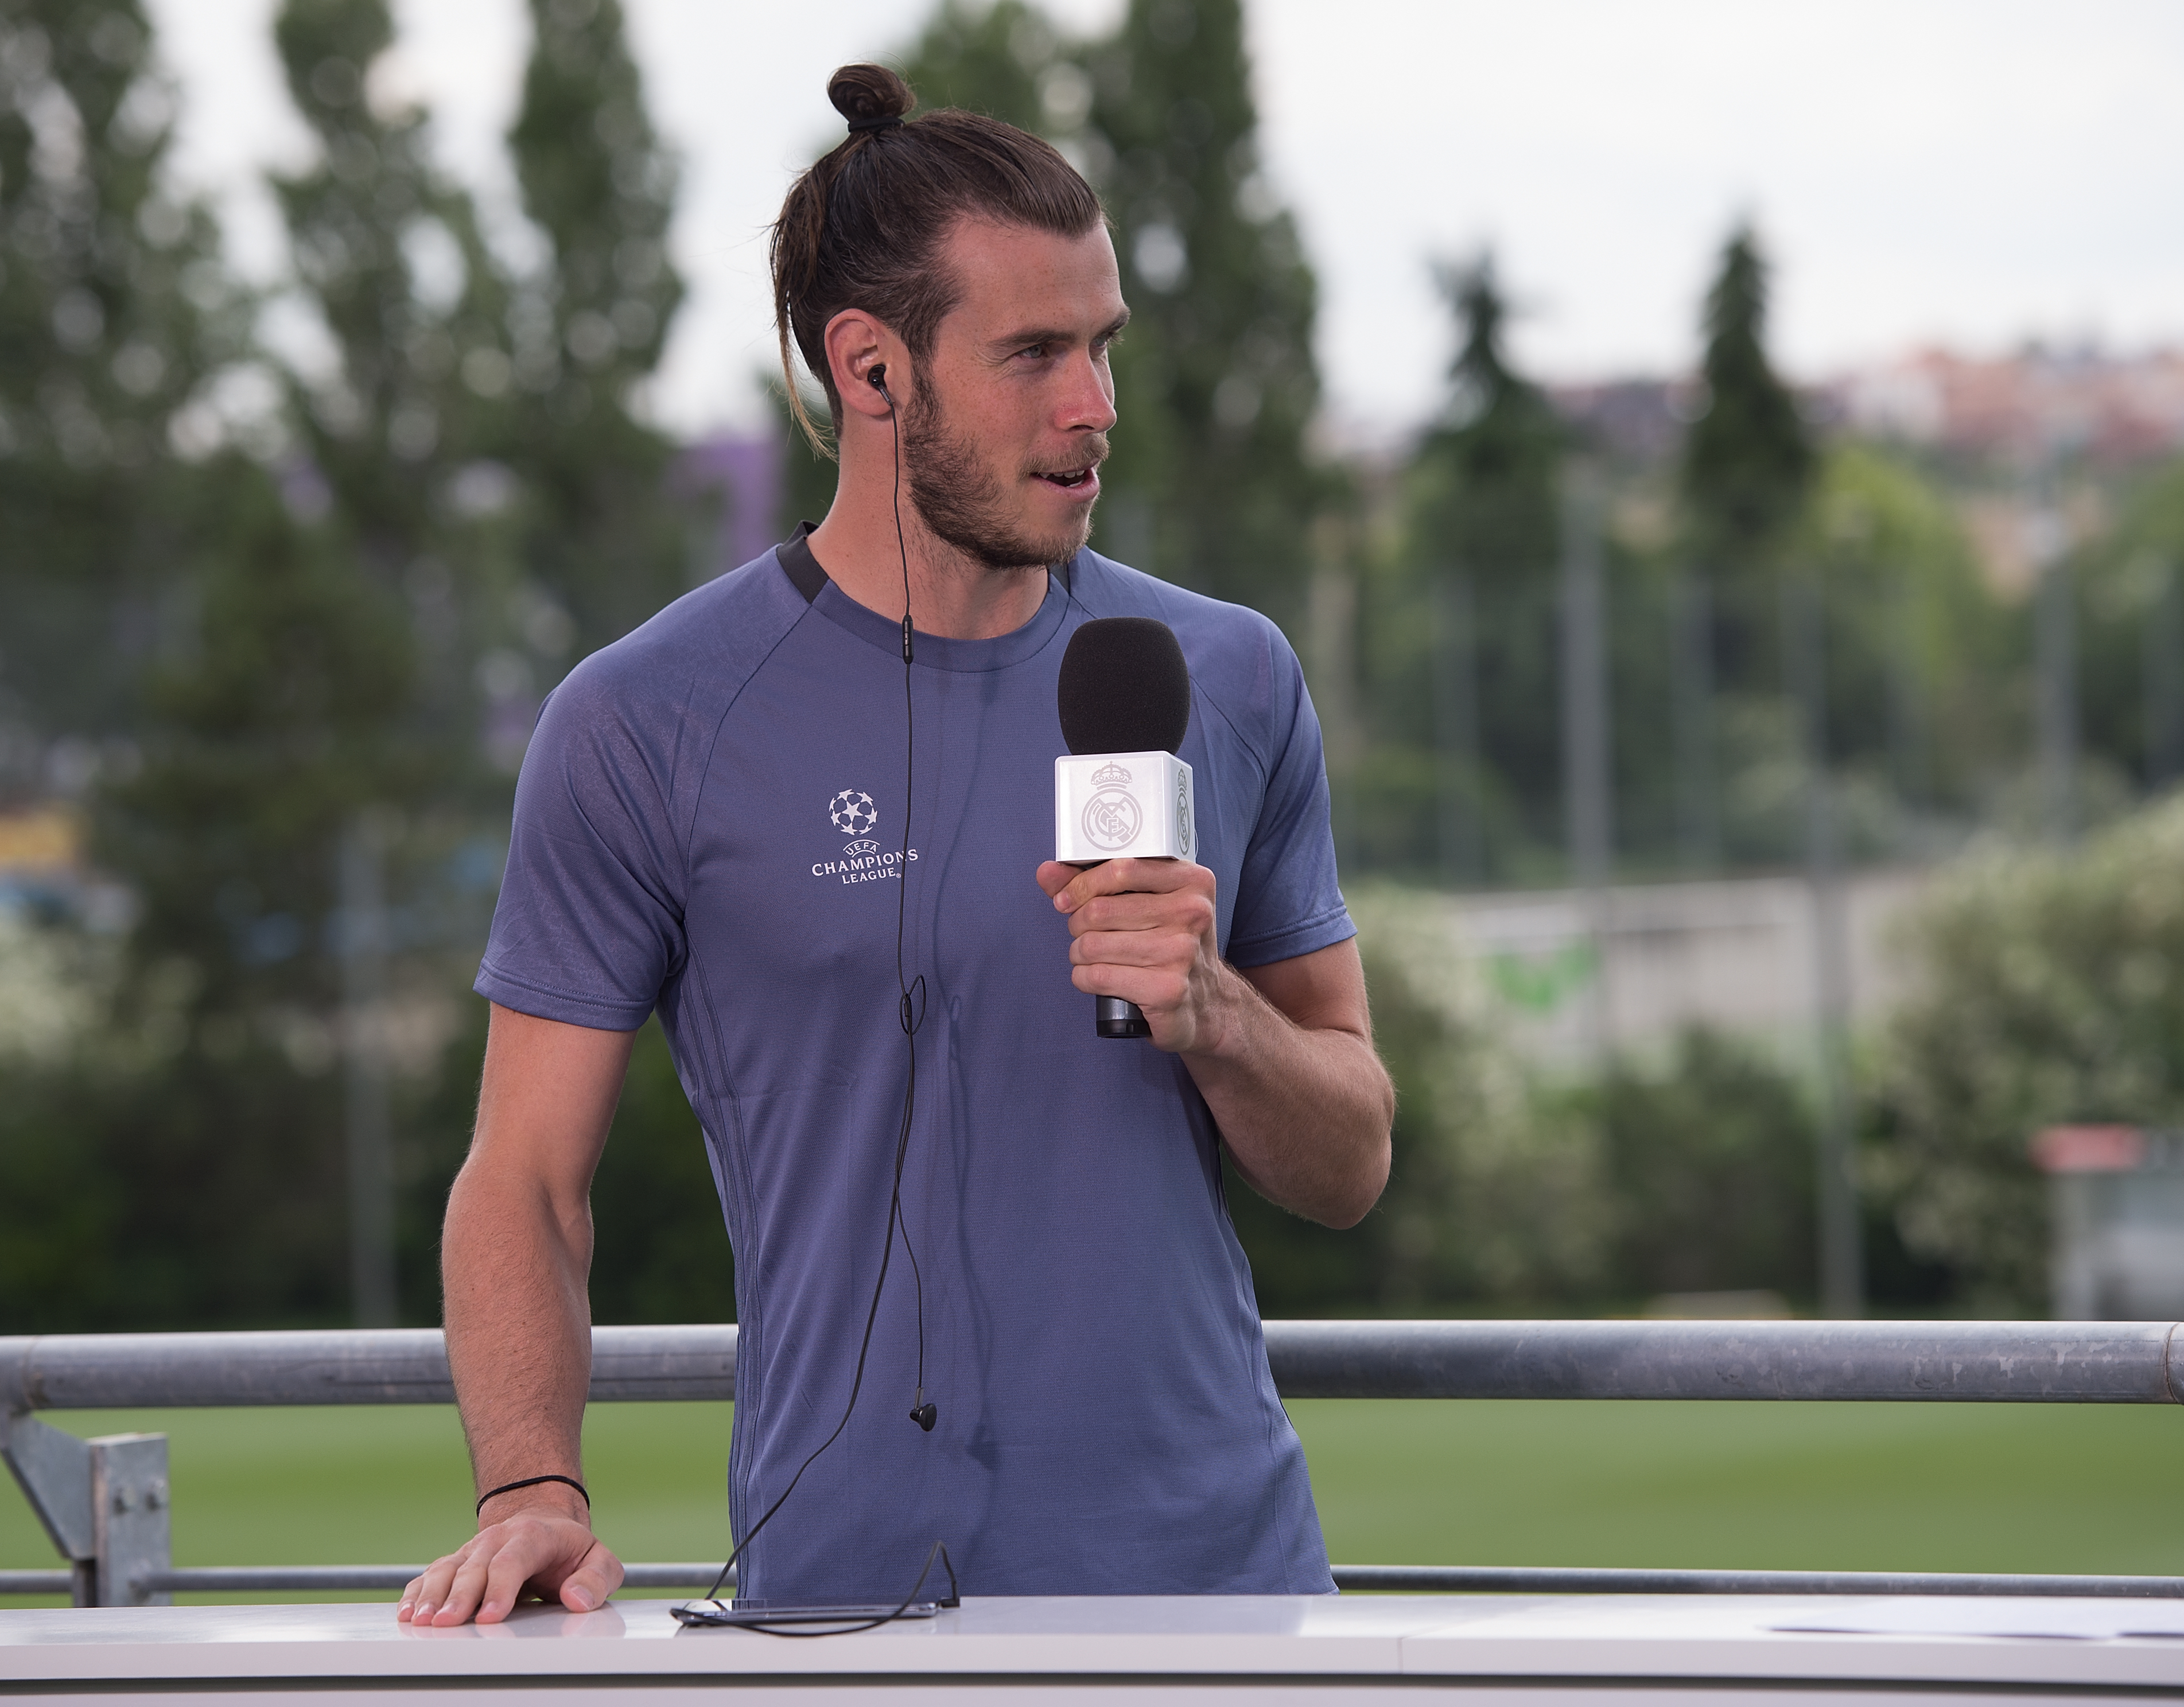 MADRID, SPAIN - MAY 30: Gareth Bale of Real Madrid CF gives an interview at the Real Madrid UEFA Open Media Day at Valdebebas training ground on May 30, 2017 in Madrid, Spain. (Photo by Denis Doyle/Getty Images )